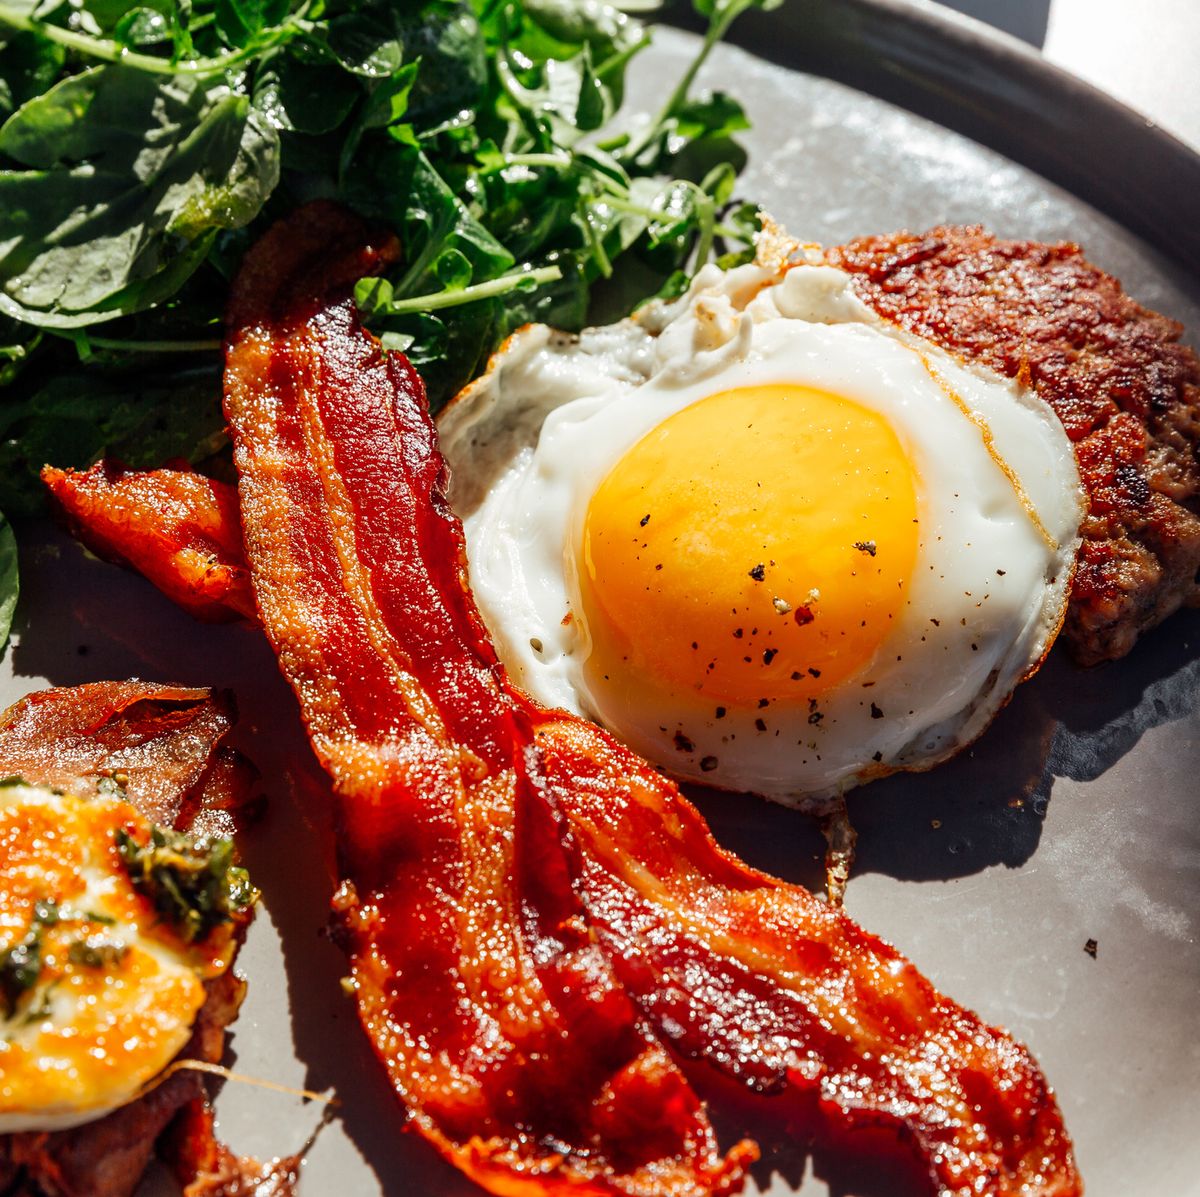 https://hips.hearstapps.com/hmg-prod/images/keto-breakfast-with-fried-egg-bacon-cheese-ground-royalty-free-image-1692619276.jpg?crop=0.668xw:1.00xh;0.167xw,0&resize=1200:*